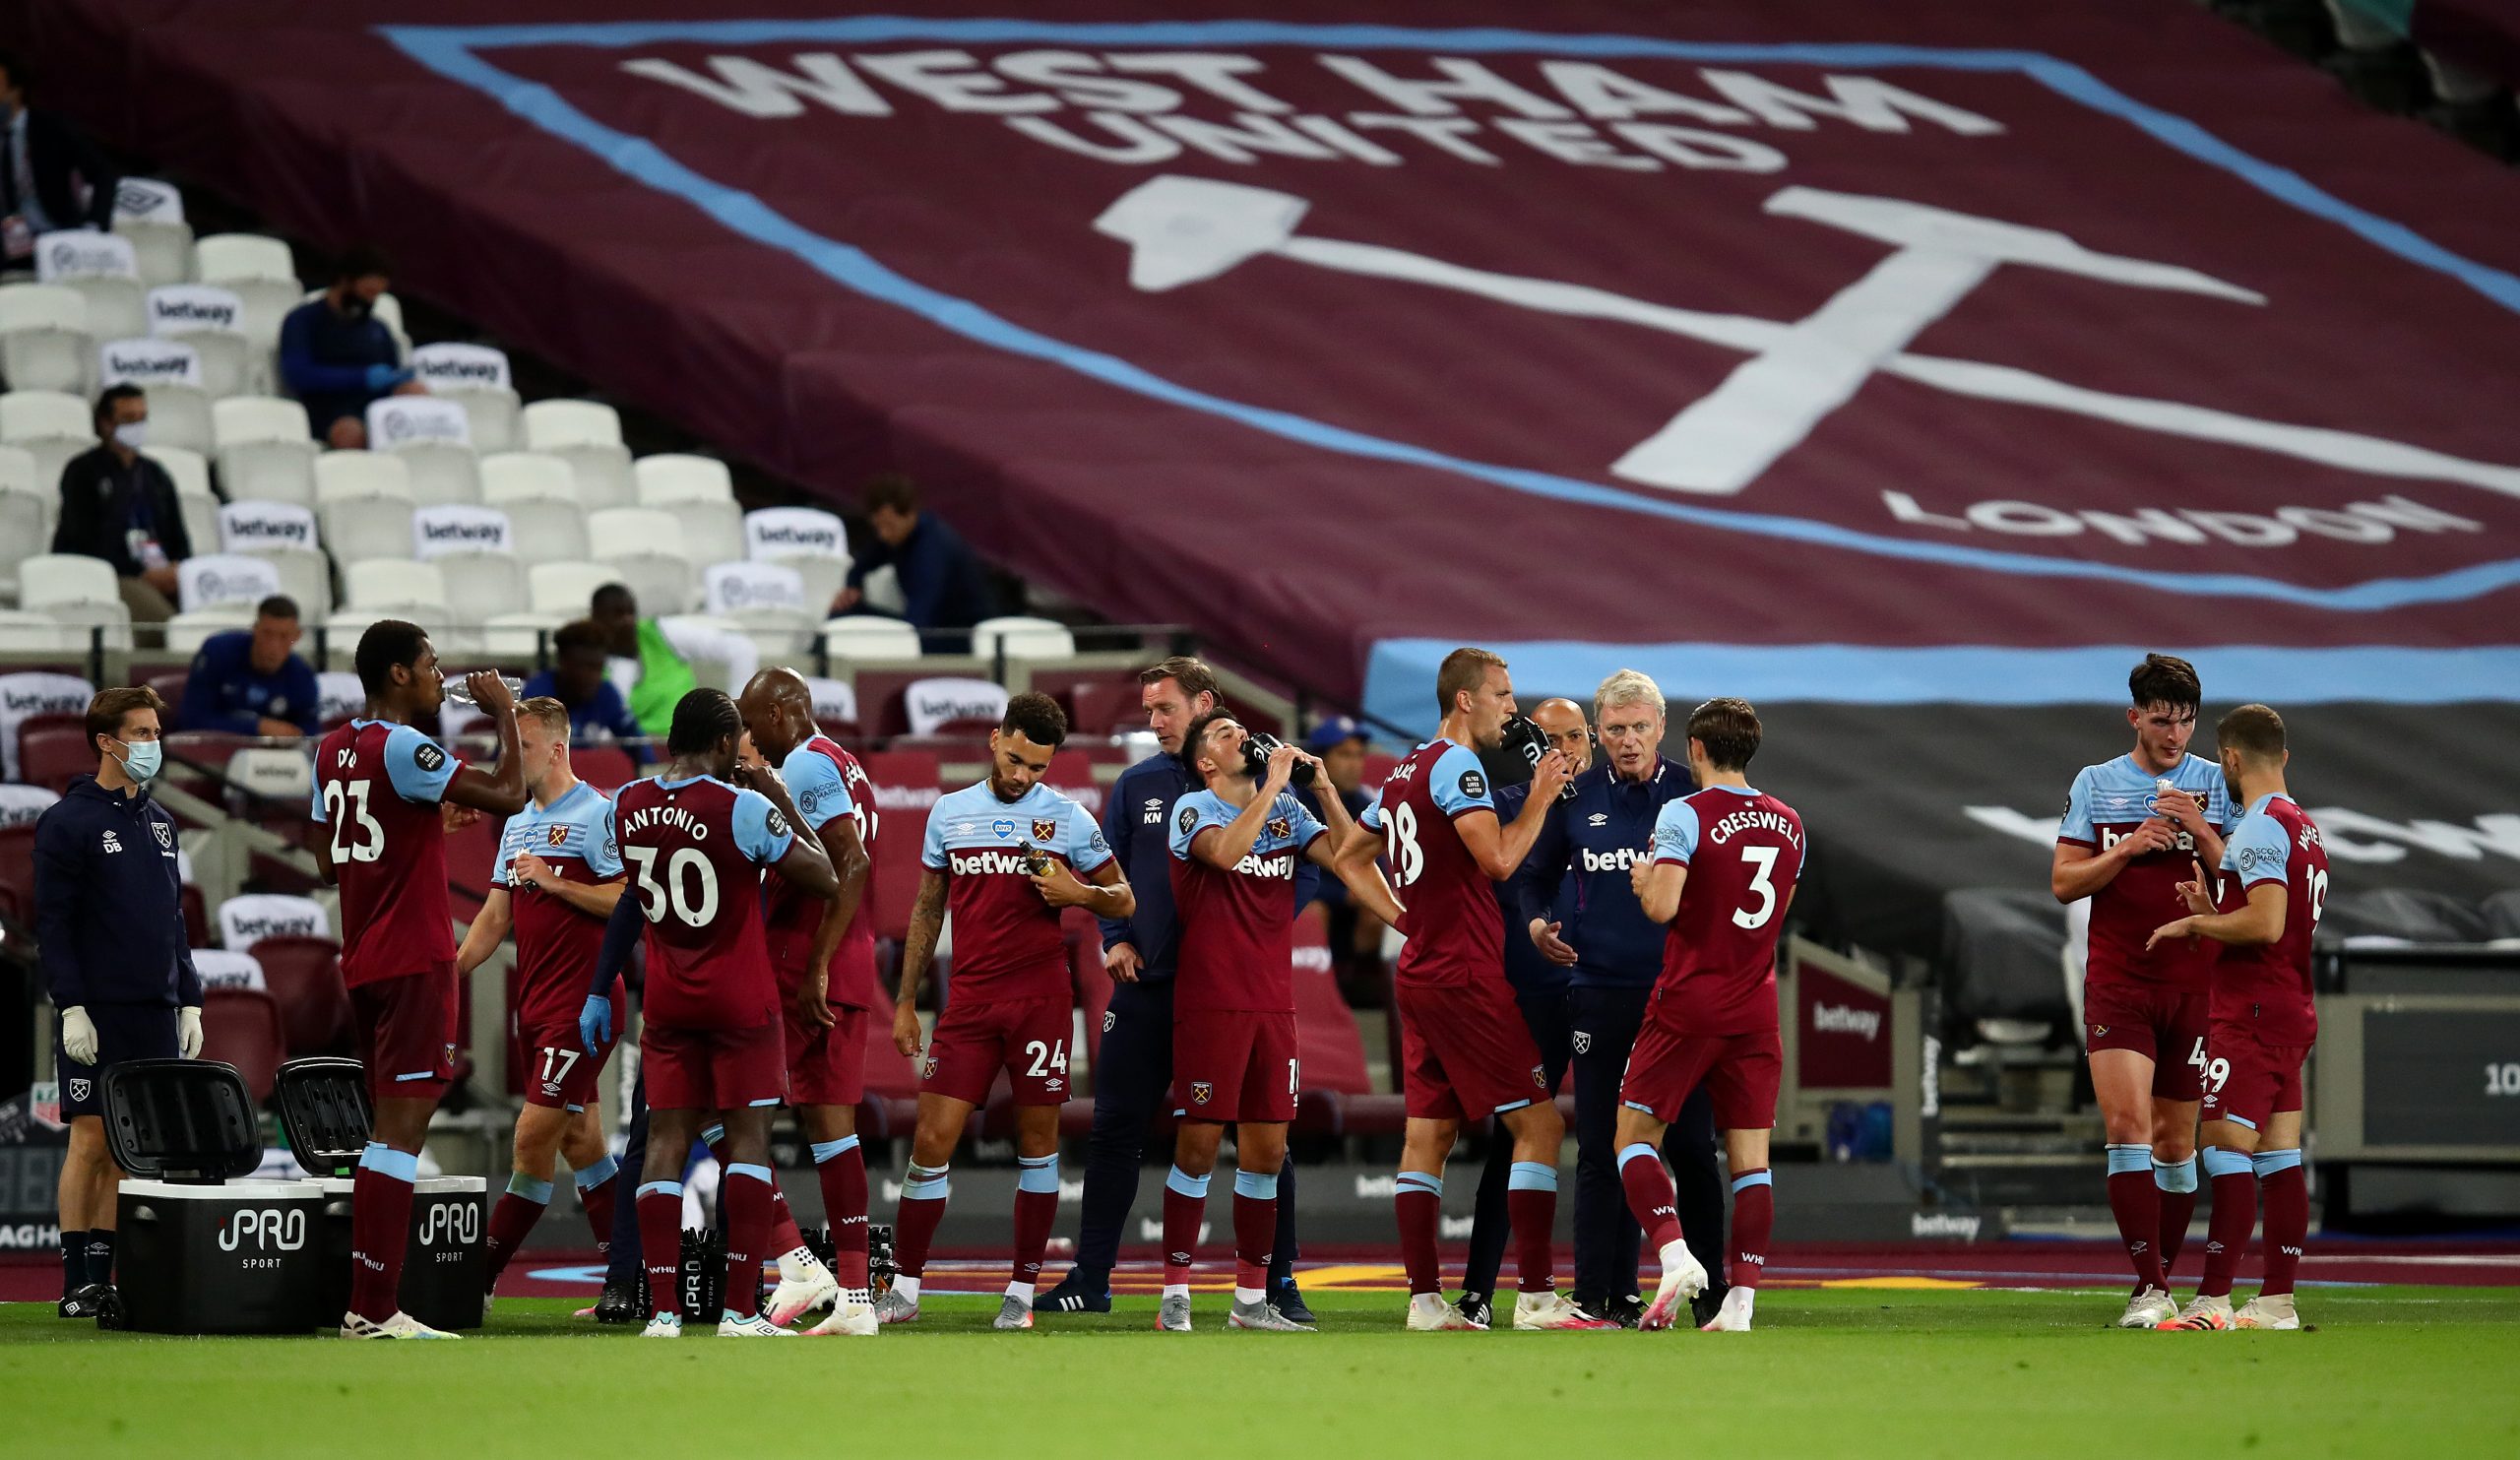 4-2-3-1 West Ham United Predicted Lineup Vs Manchester United (West Ham players enjoying their drinks break in the photo)